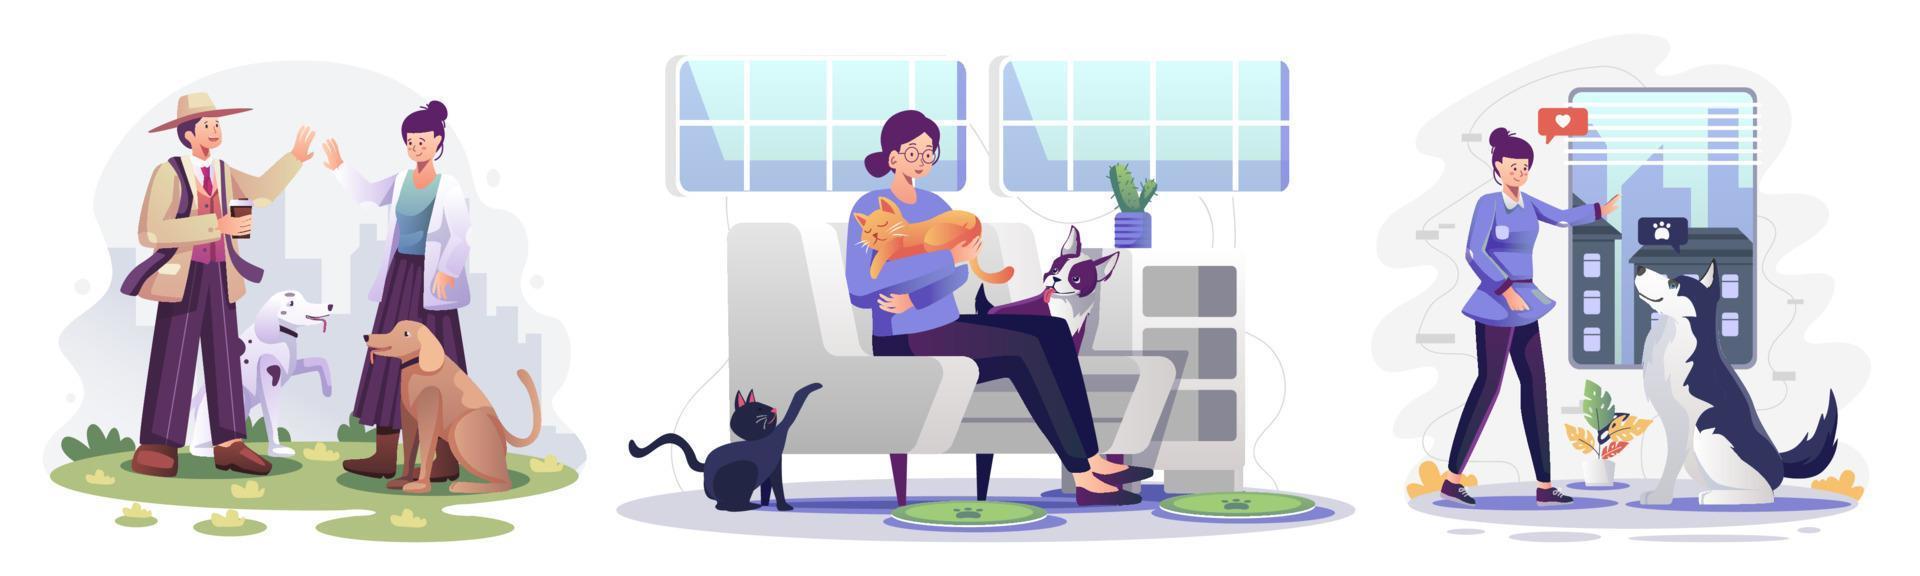 People and pets. Cat and dog with Man and woman pet owner characters vector